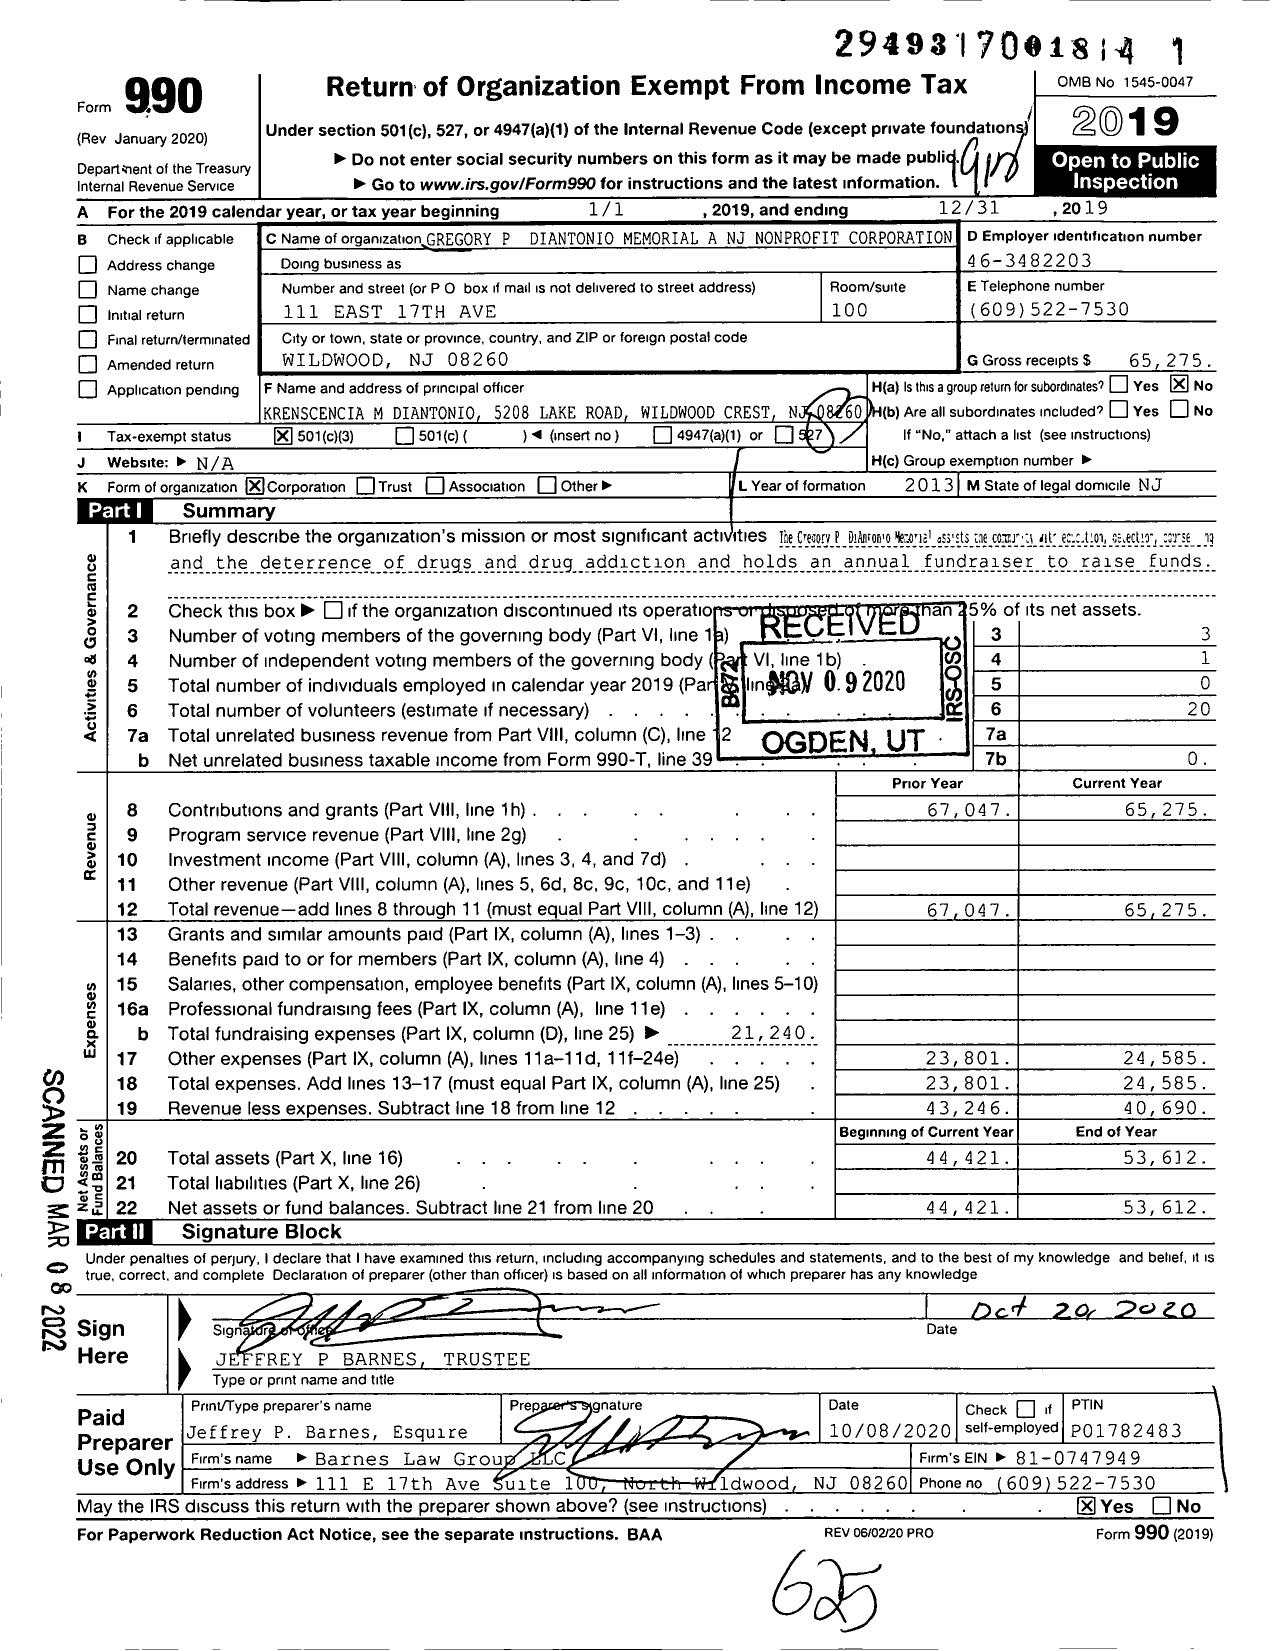 Image of first page of 2019 Form 990 for Gregory P Diantonio Memorial A NJ Nonprofit Corporation